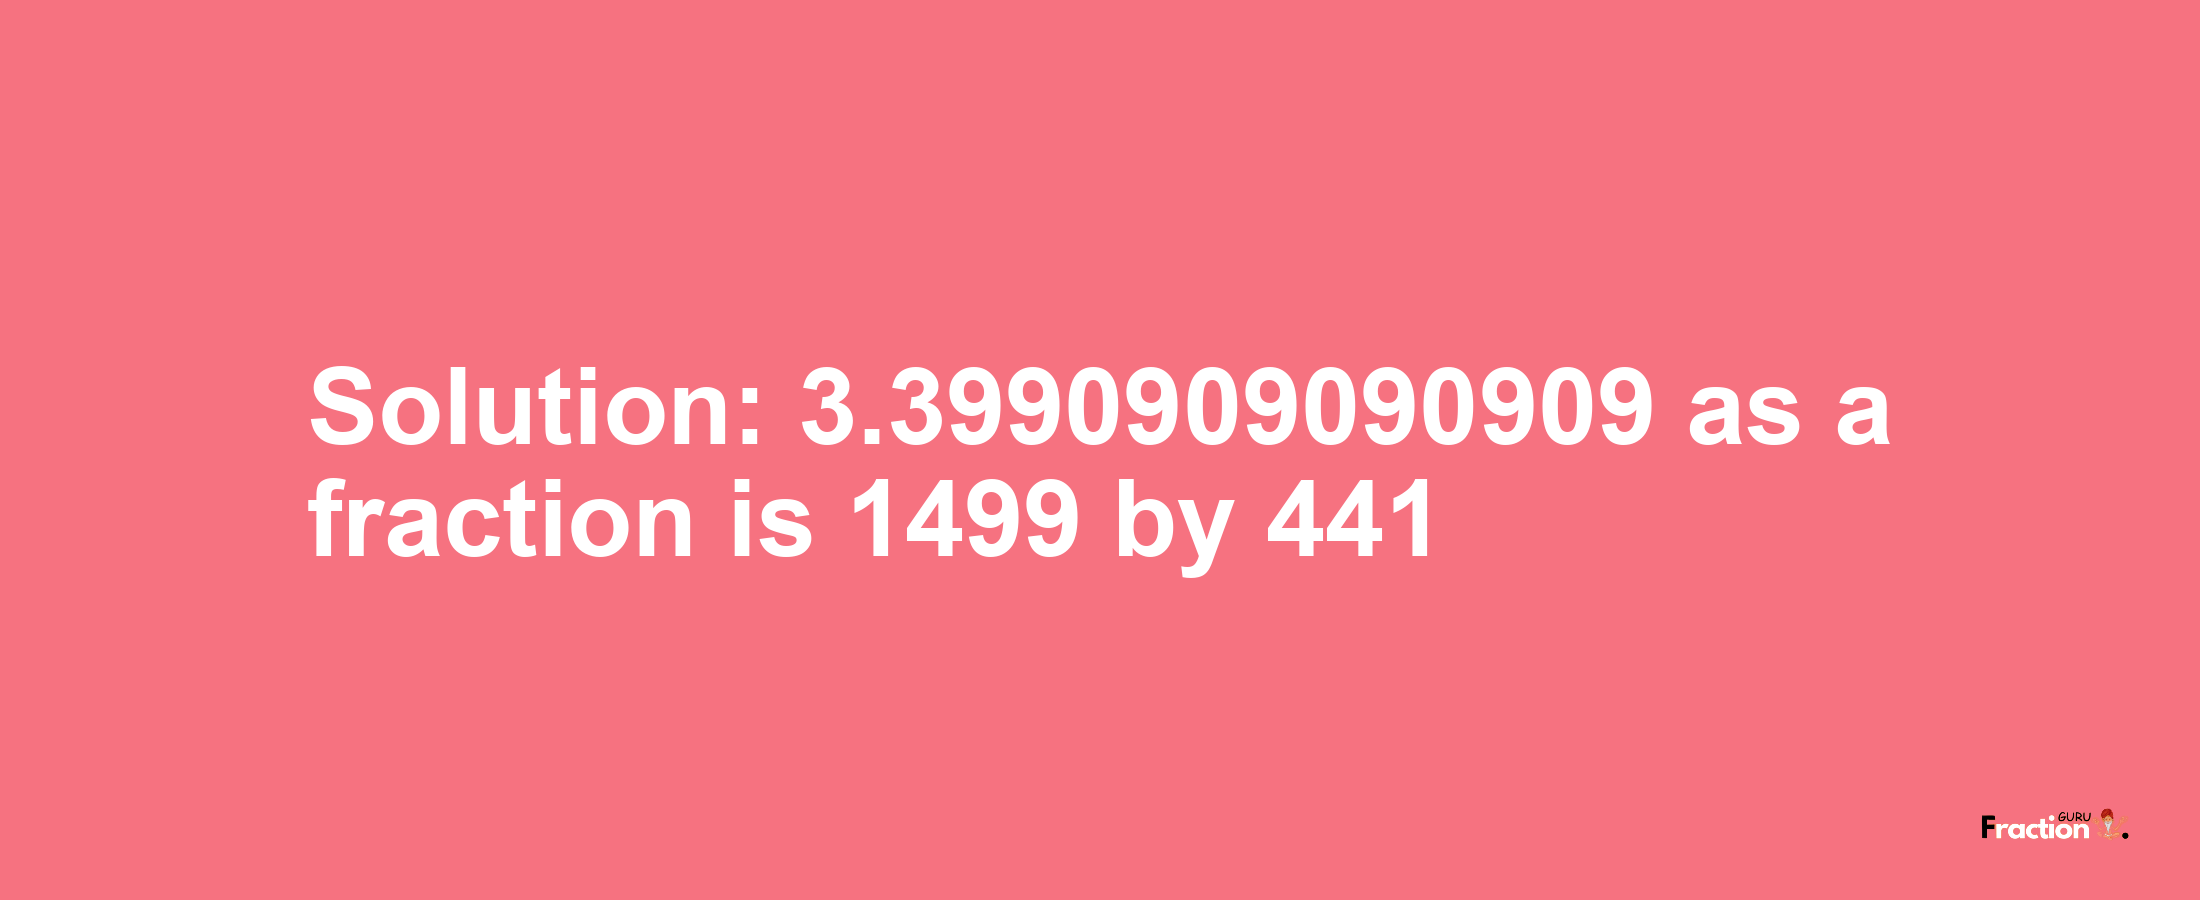 Solution:3.3990909090909 as a fraction is 1499/441